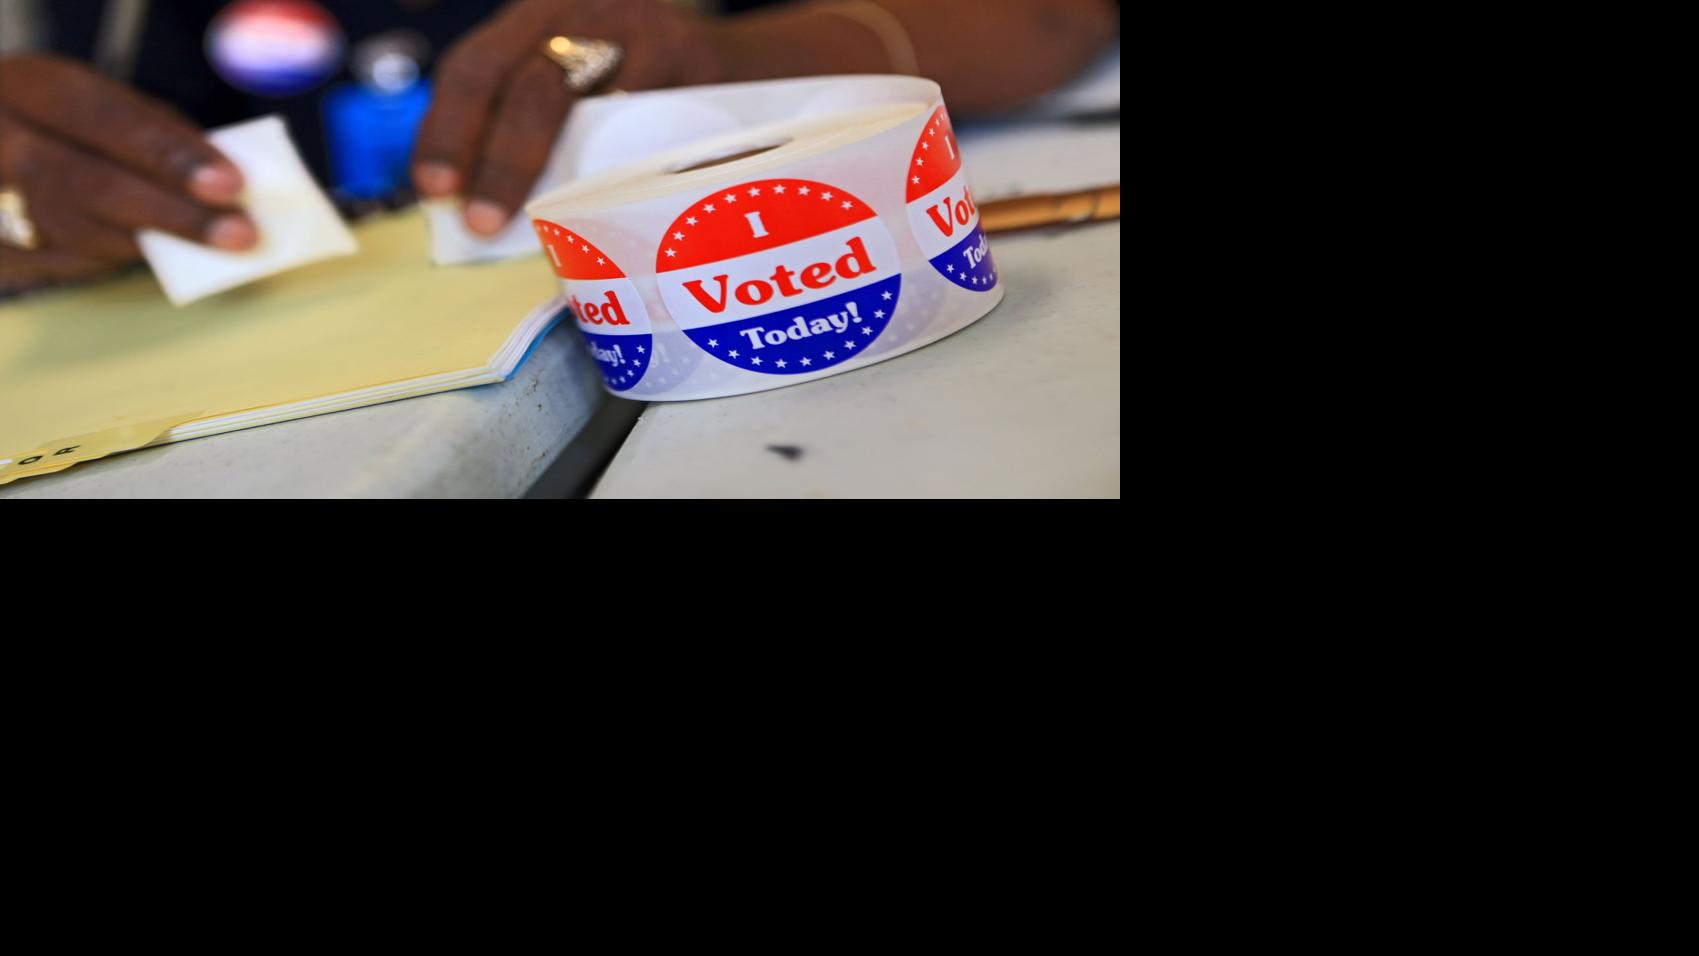 St. Louis County says incorrect sample ballots sent to voters, new ones on way | Metro ...